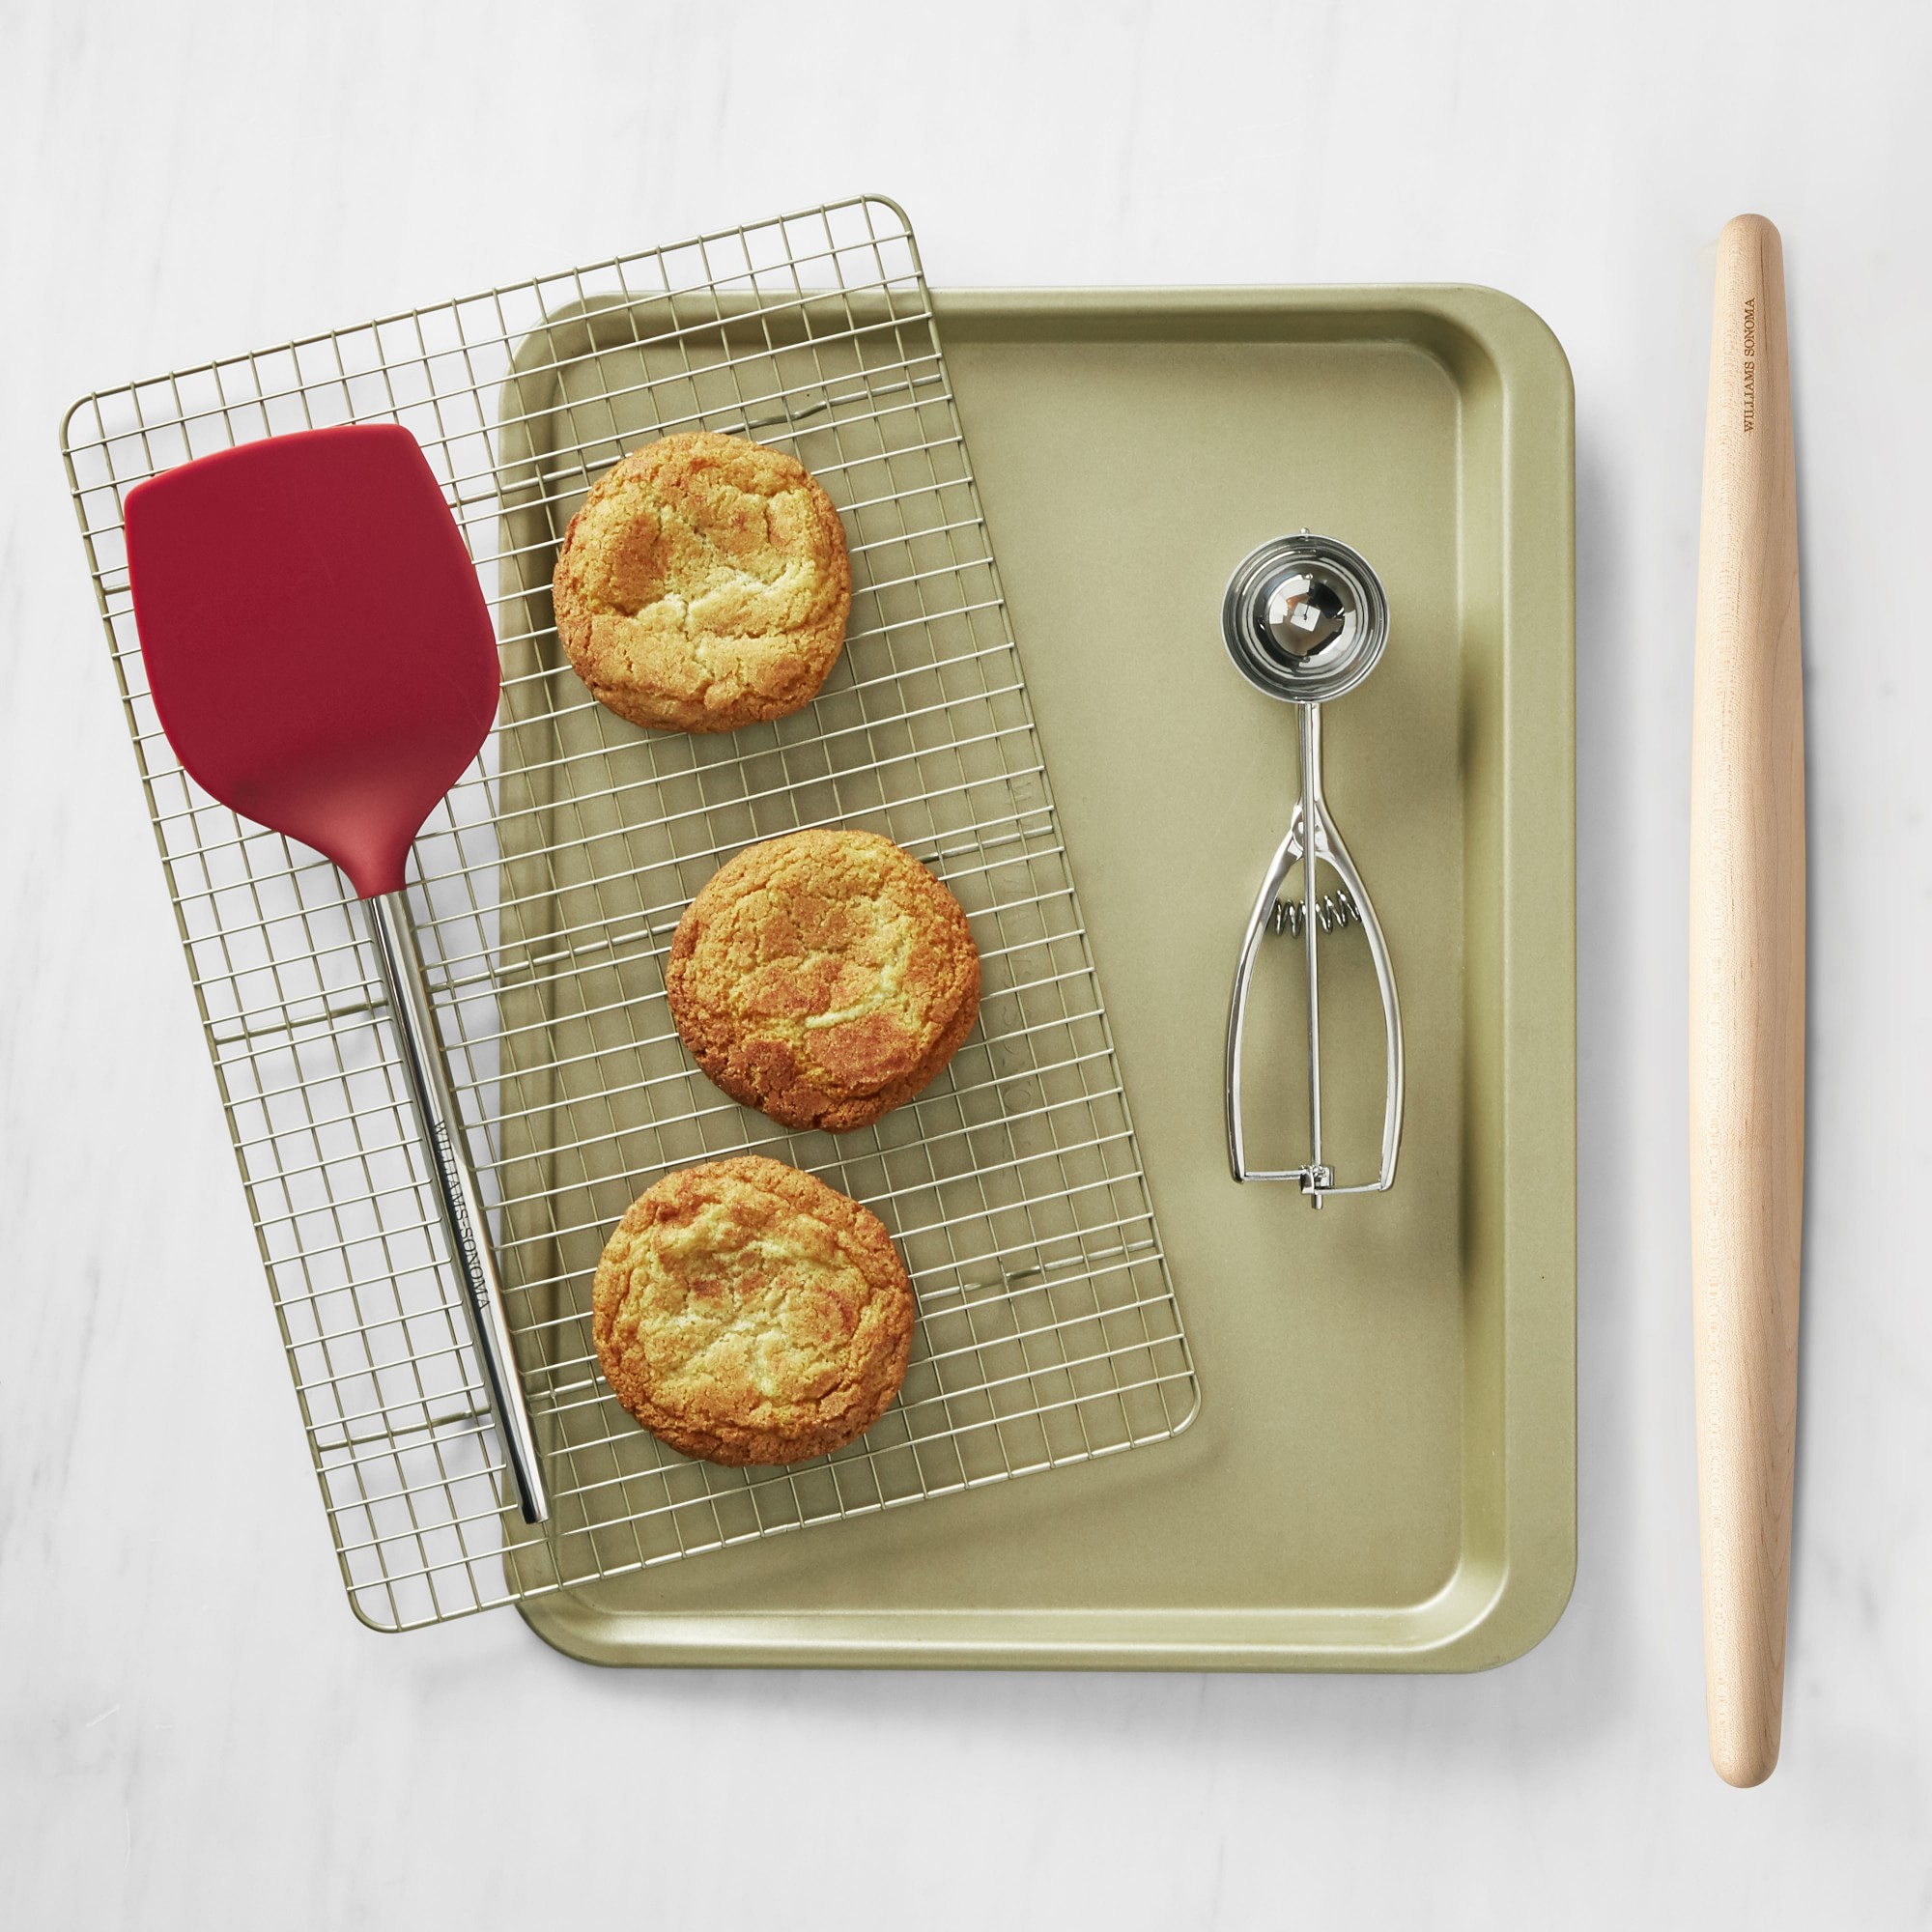 Williams Sonoma Goldtouch® Pro Nonstick 5-Piece Ultimate Cookie Baking Set